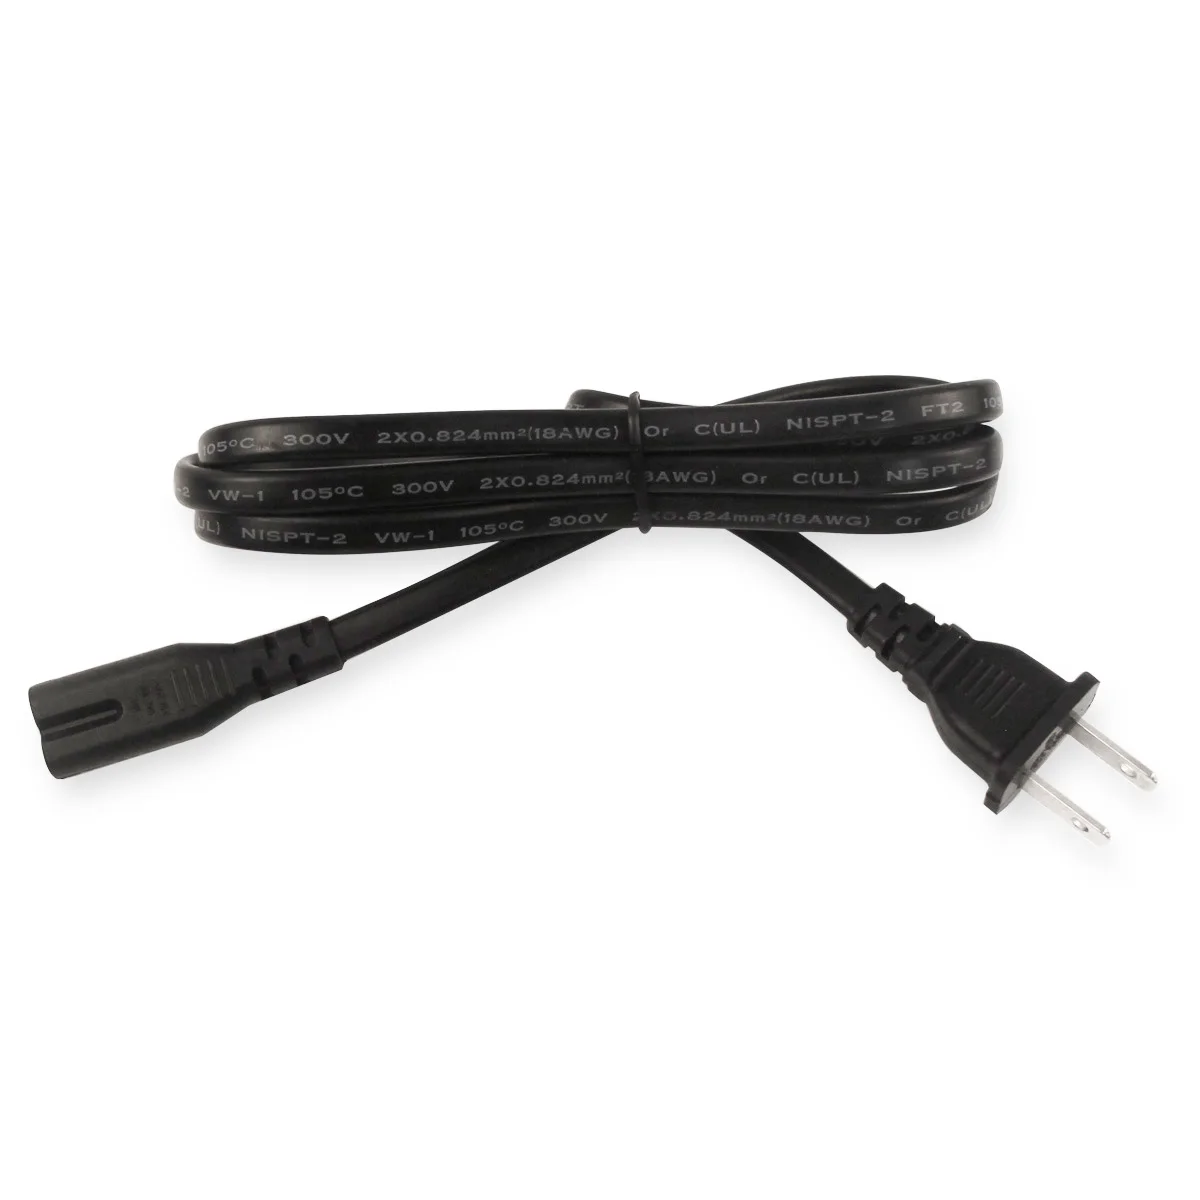 SJT 14 16AWG ac extension Cable PVC black us male to female Nema5-15P splitter y type power cord 27